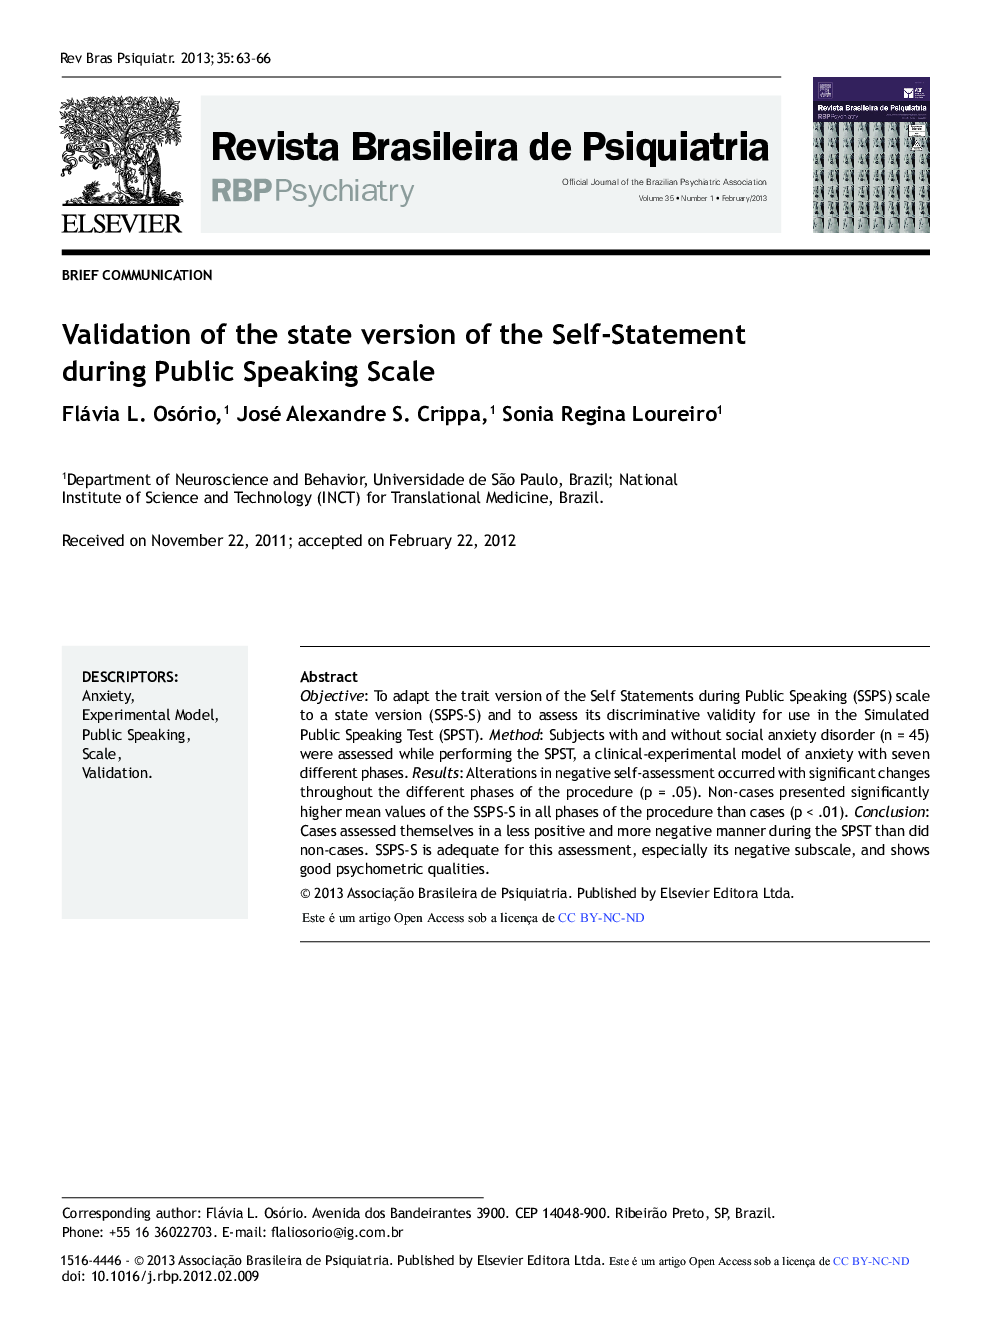 Validation of the State Version of the Self-statement during Public Speaking Scale